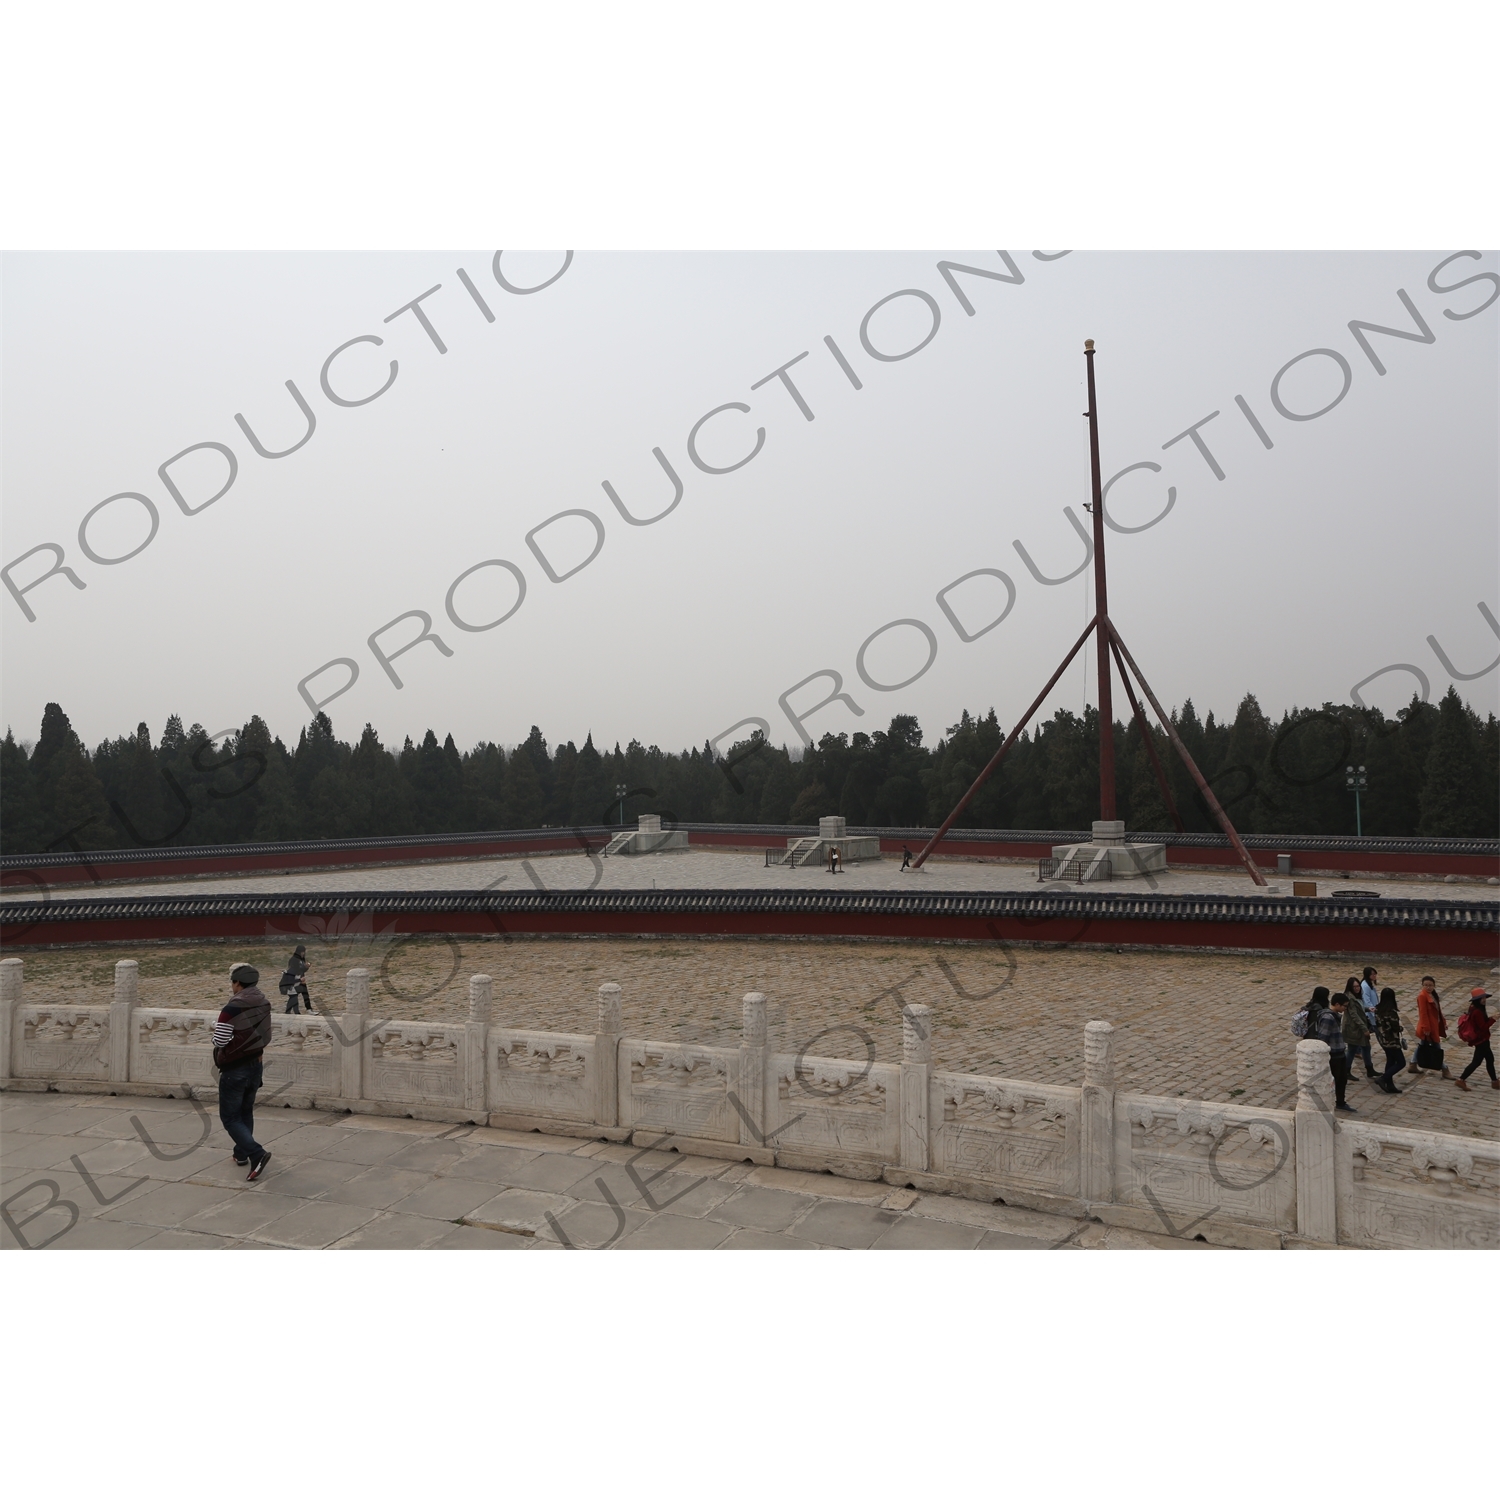 'Viewing Lantern Pole' in the Circular Mound Altar (Yuanqiu Tan) Compound in the Temple of Heaven (Tiantan) in Beijing